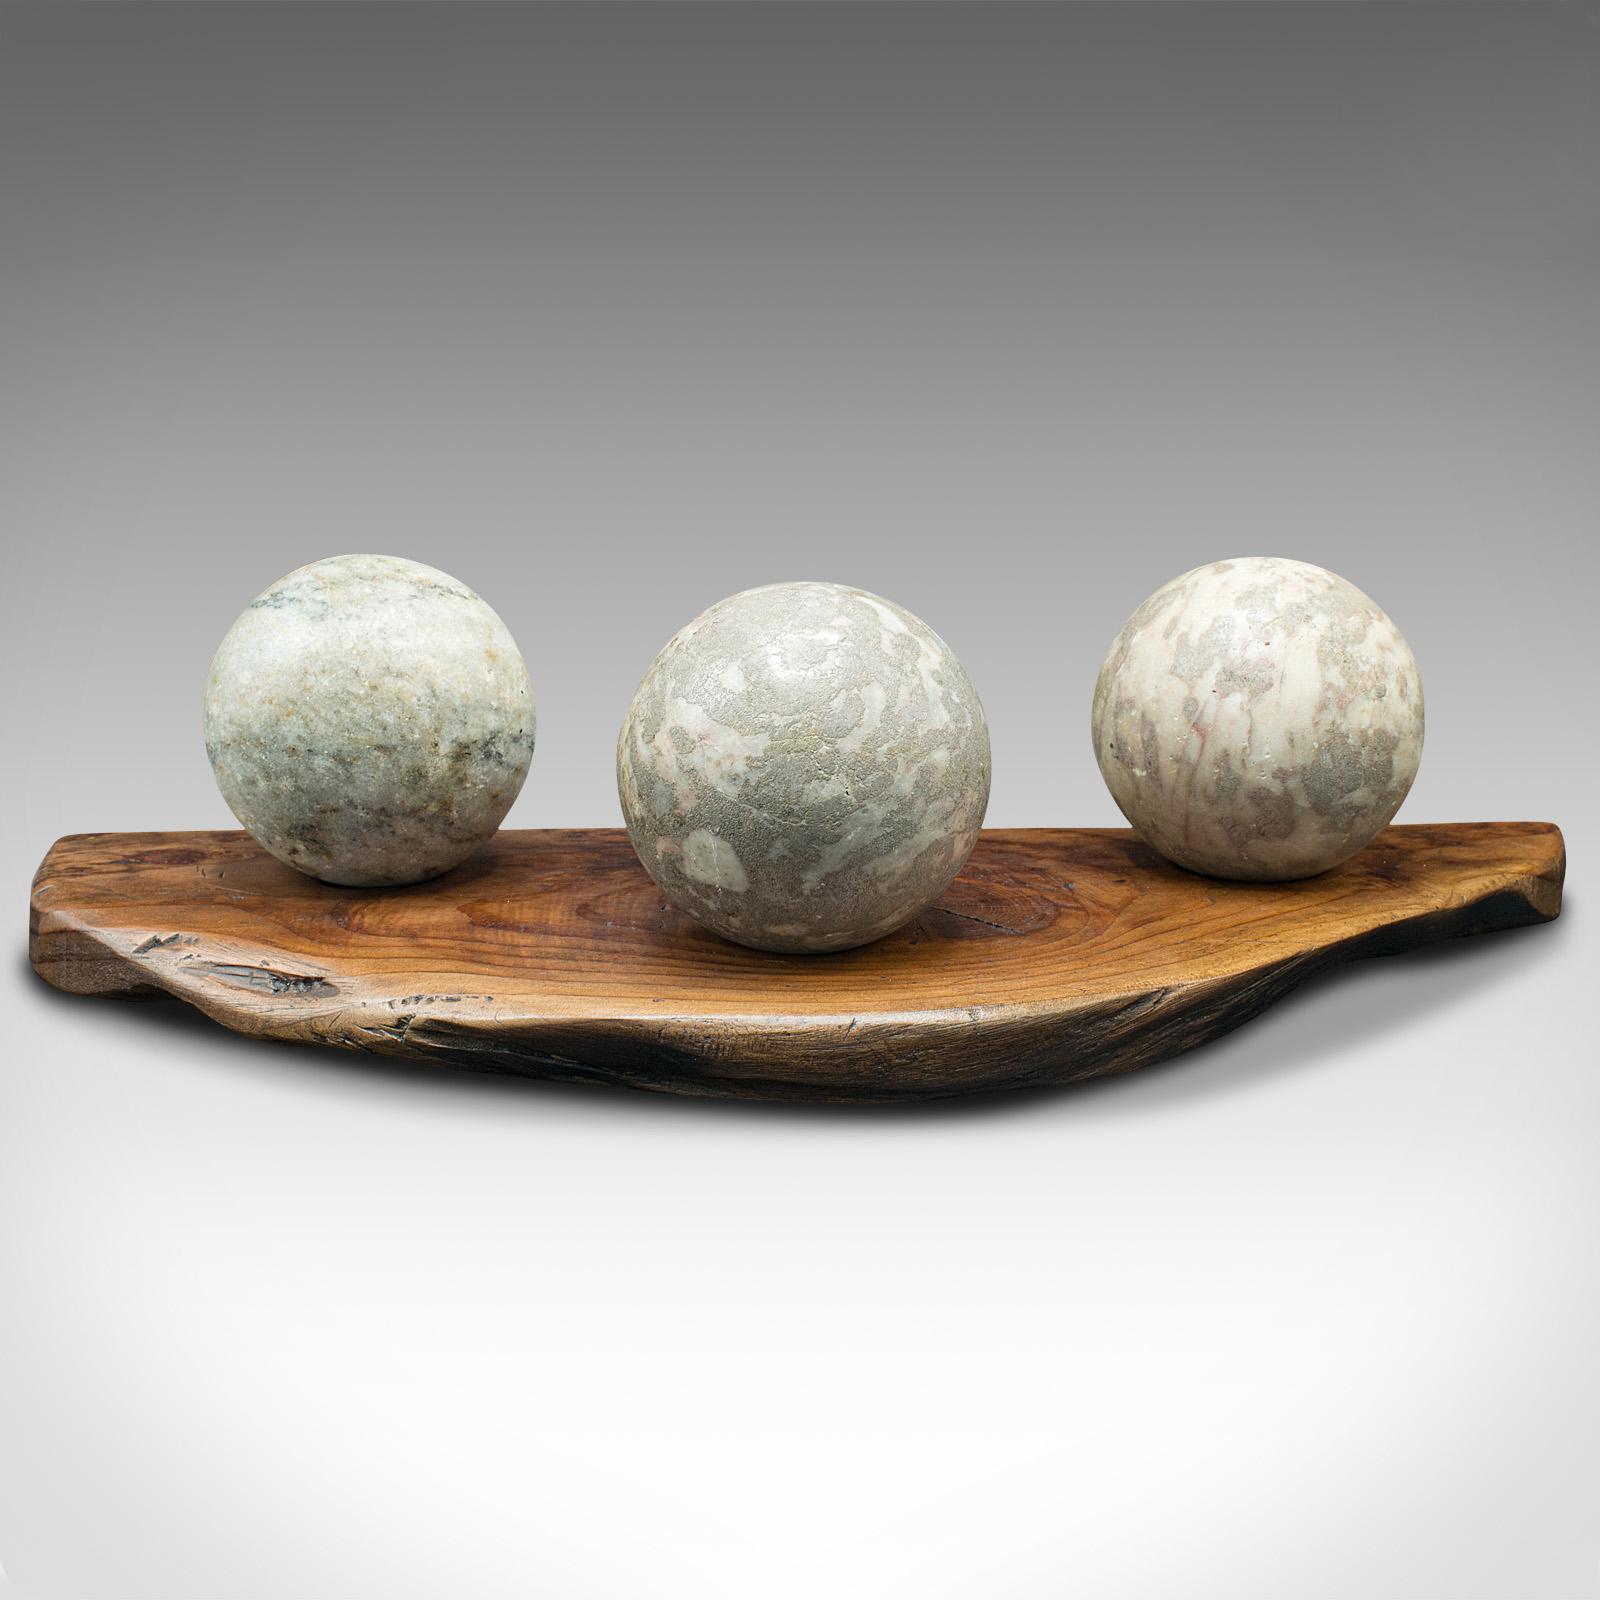 This is a vintage decorative sphere display. An English, cedar and Italian marble plinth, dating to the mid 20th century, circa 1950.

Distinctive mantlepiece or desktop decor, with cool, tactile marble
Displays a desirable aged patina and in